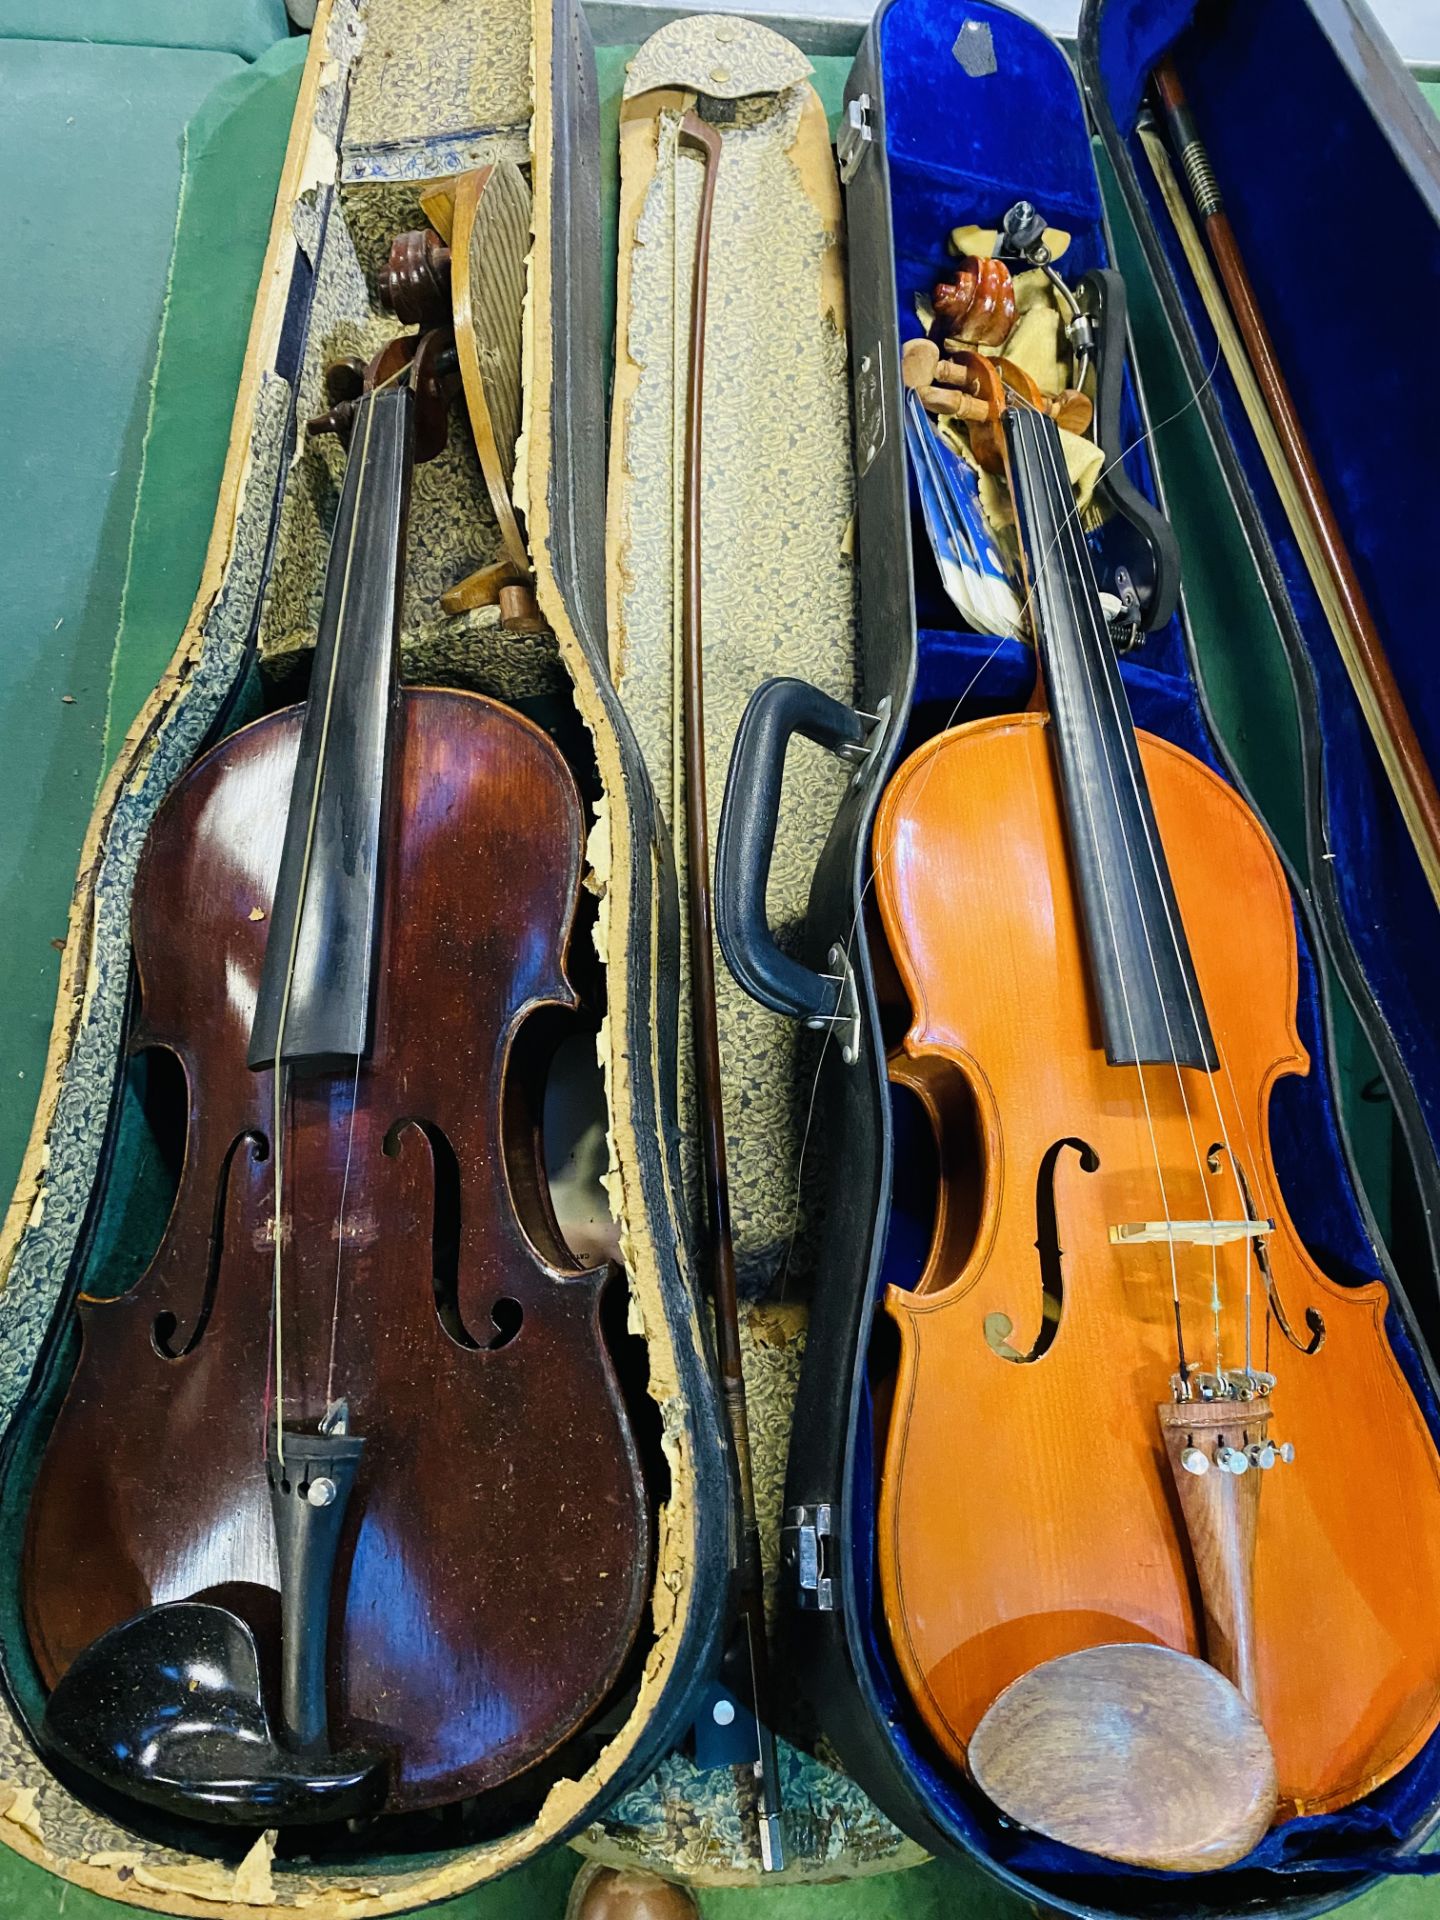 Three boxed violins with bows.